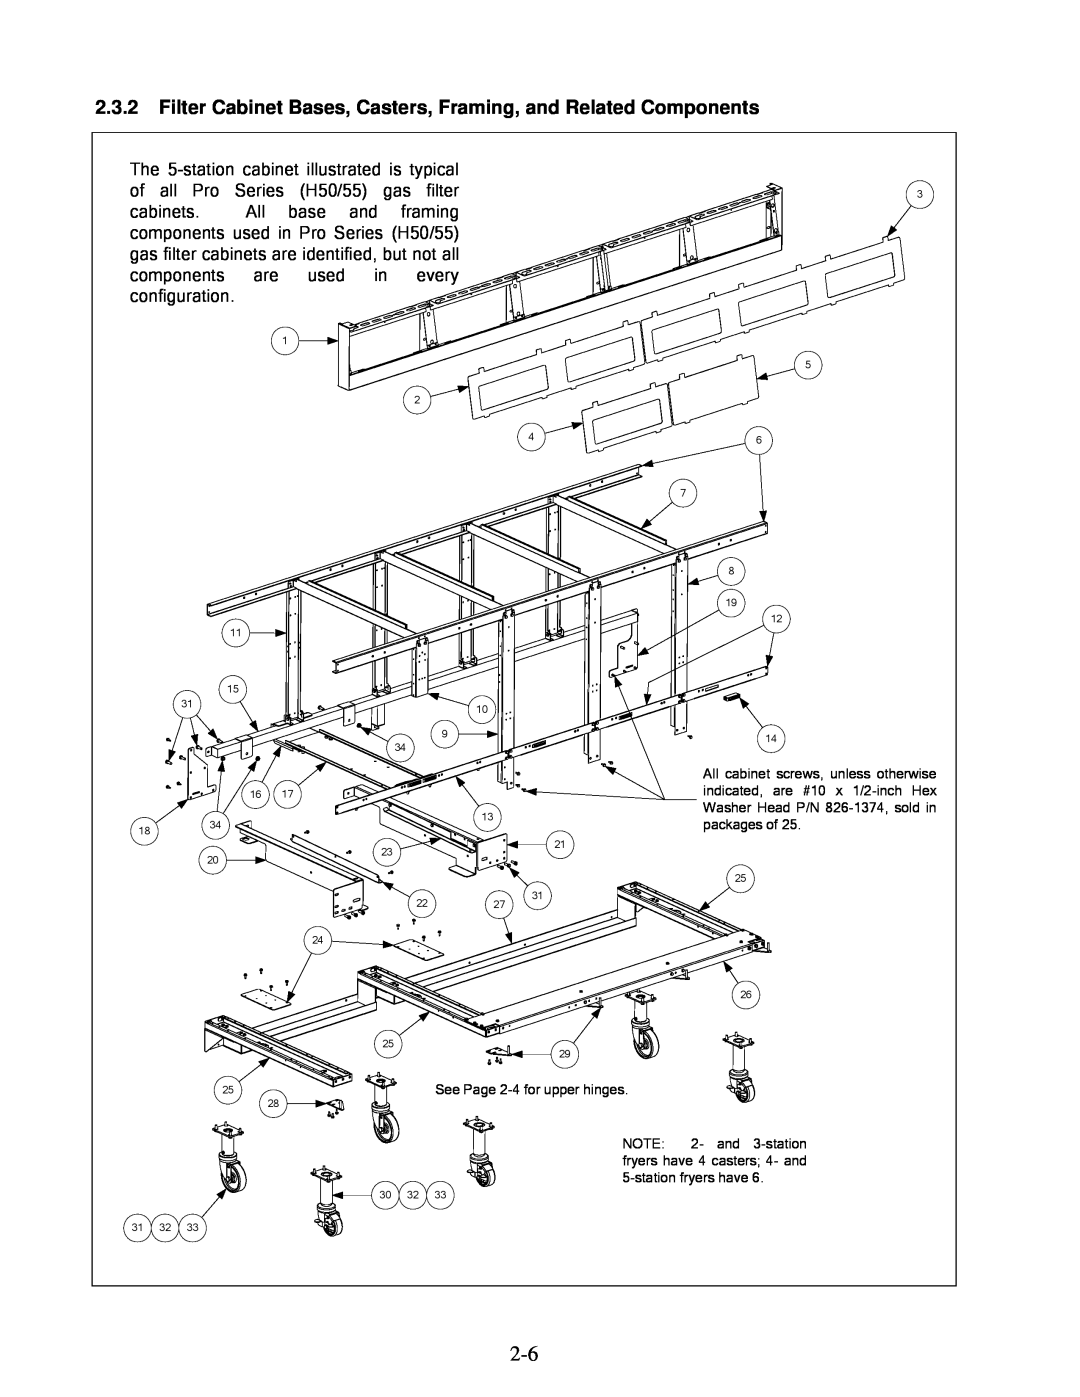 Frymaster H50 manual See Page 2-4for upper hinges 